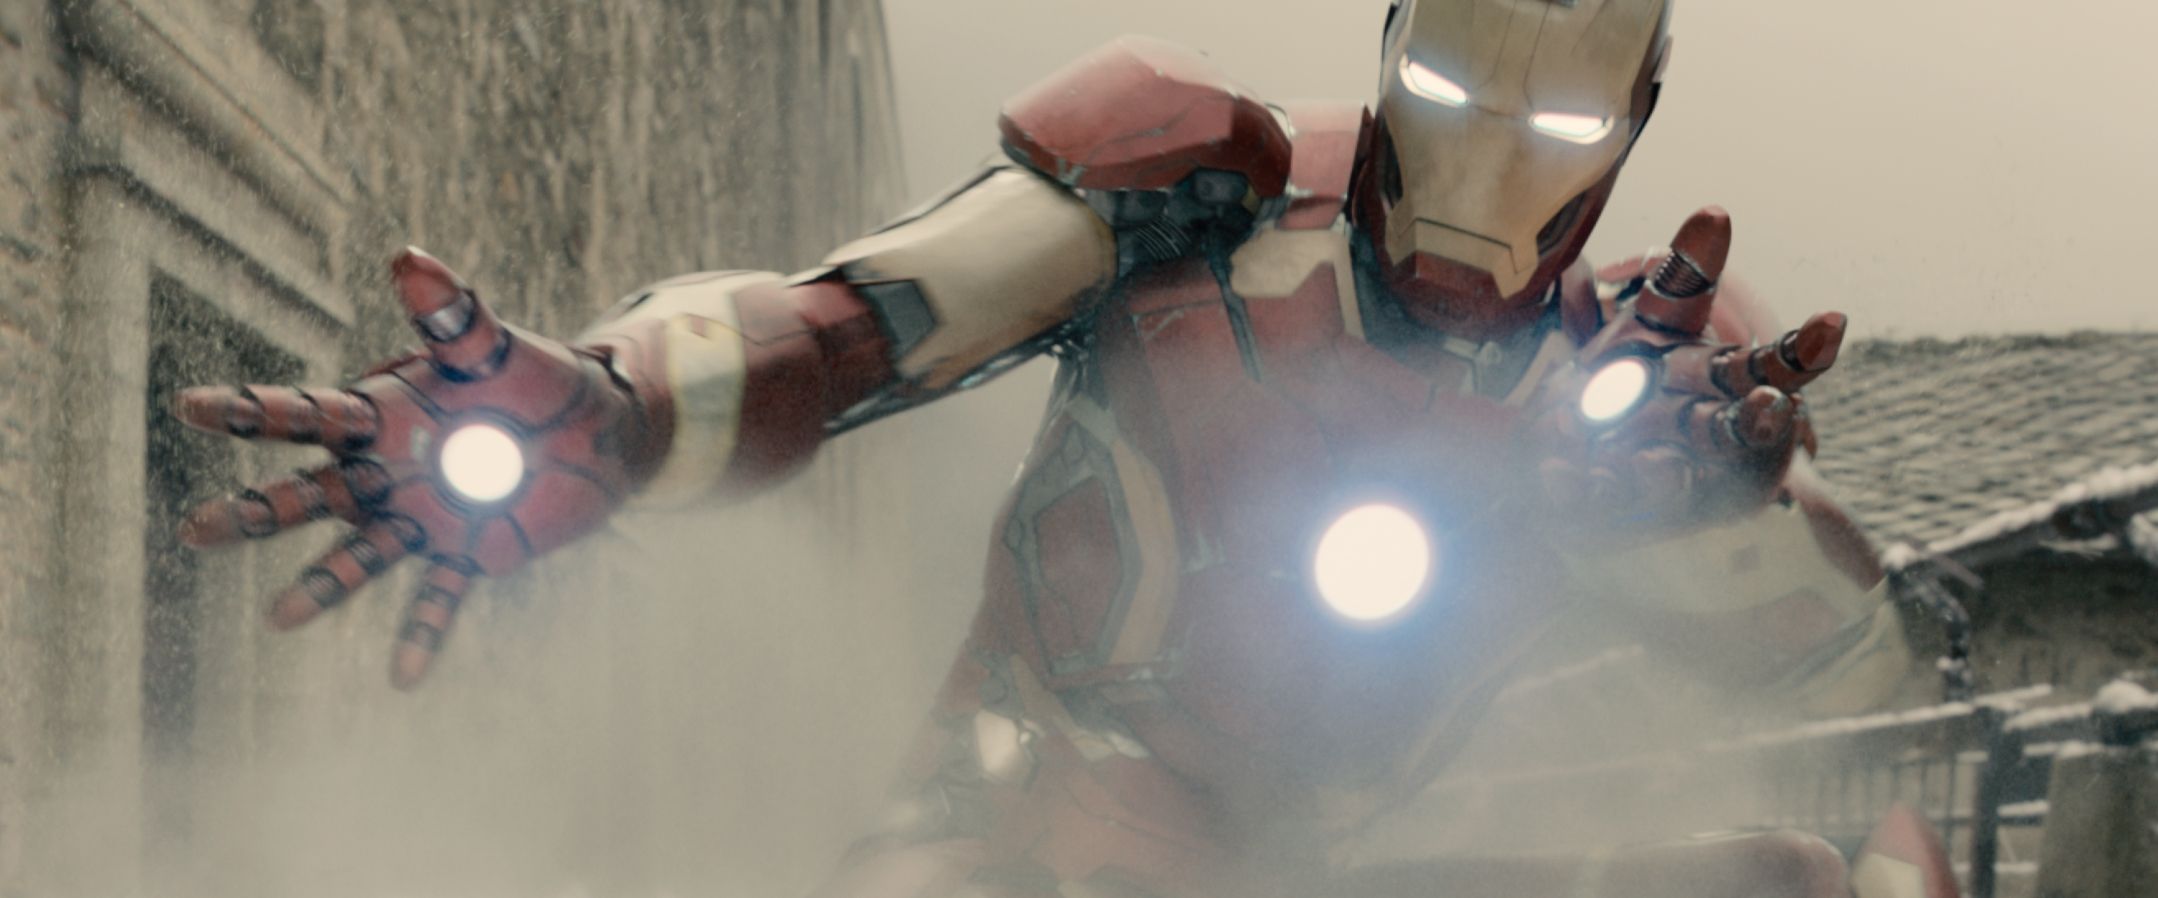 Avengers 2 Questions Answered by Marvel President Kevin Feige | Collider2158 x 898